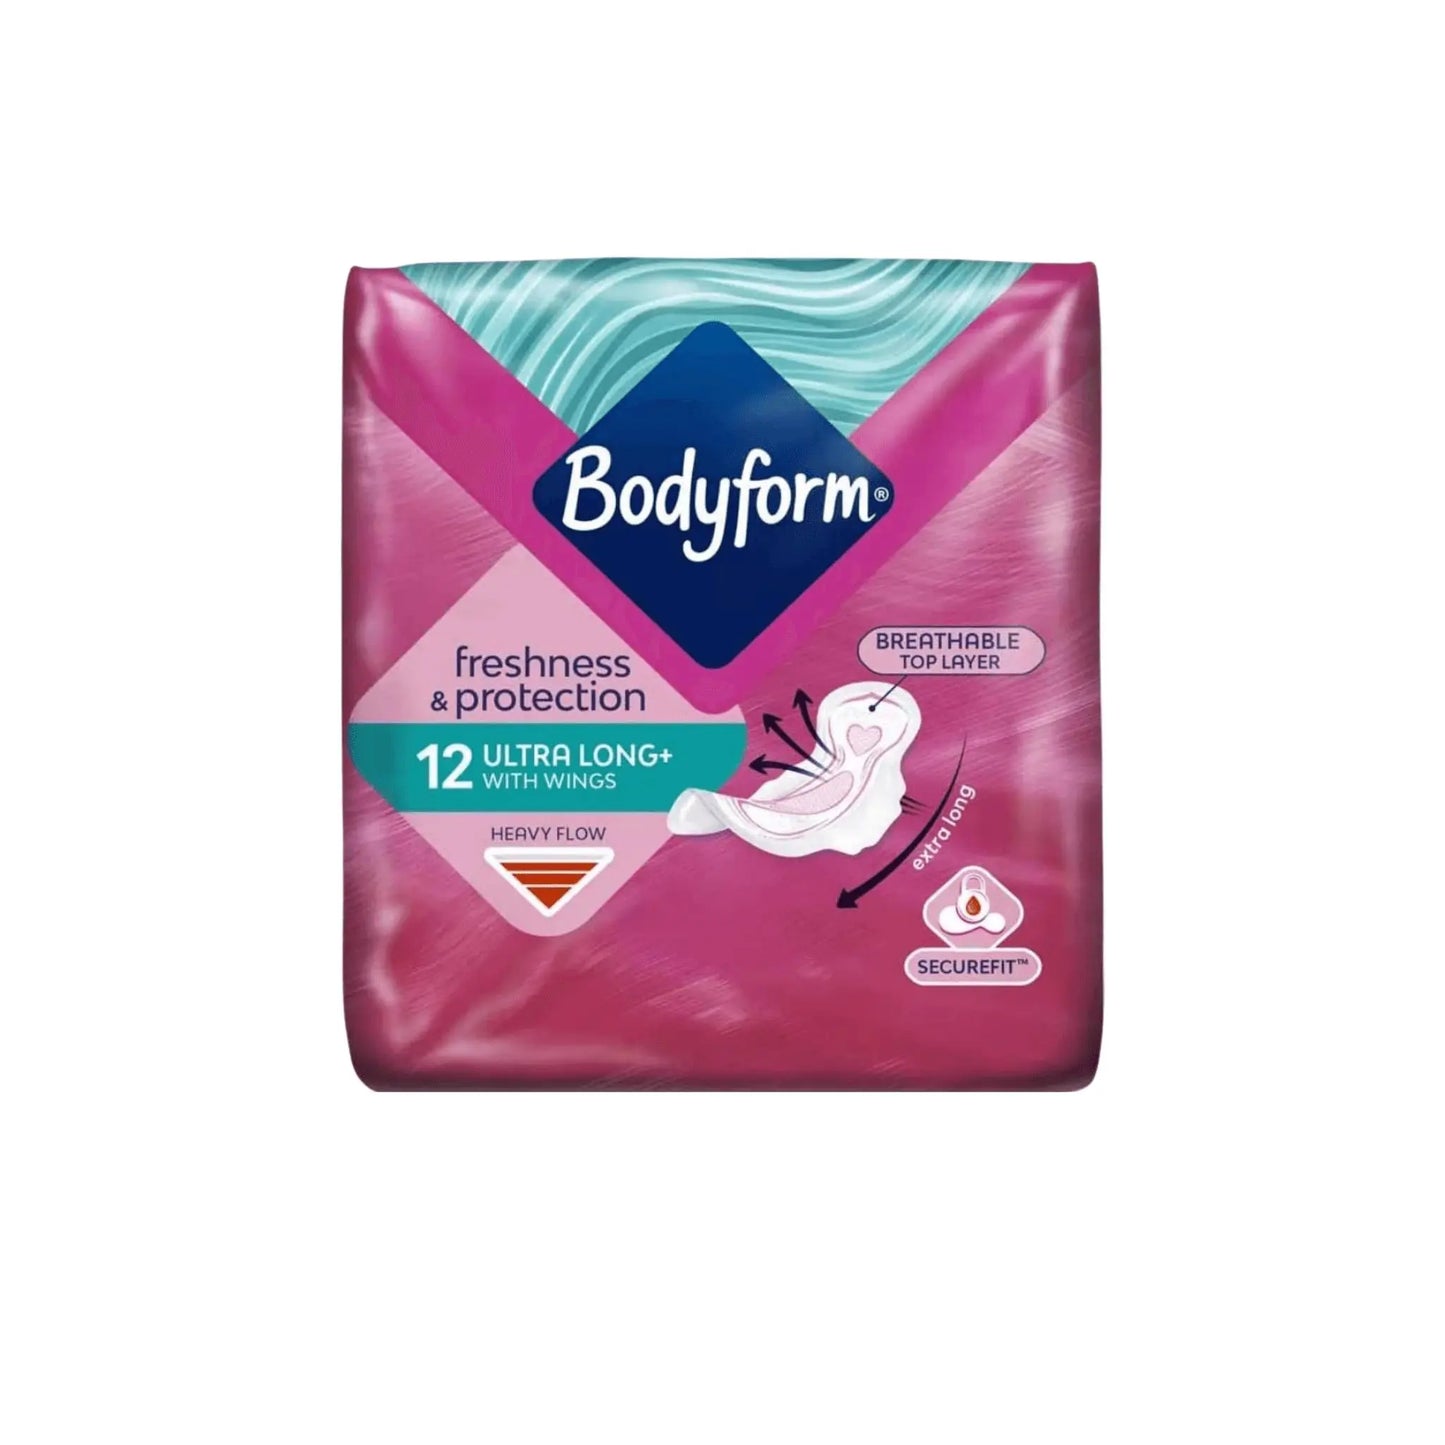 Bodyform Ultra Fit Super Winged Sanitary Towels 12 Pack